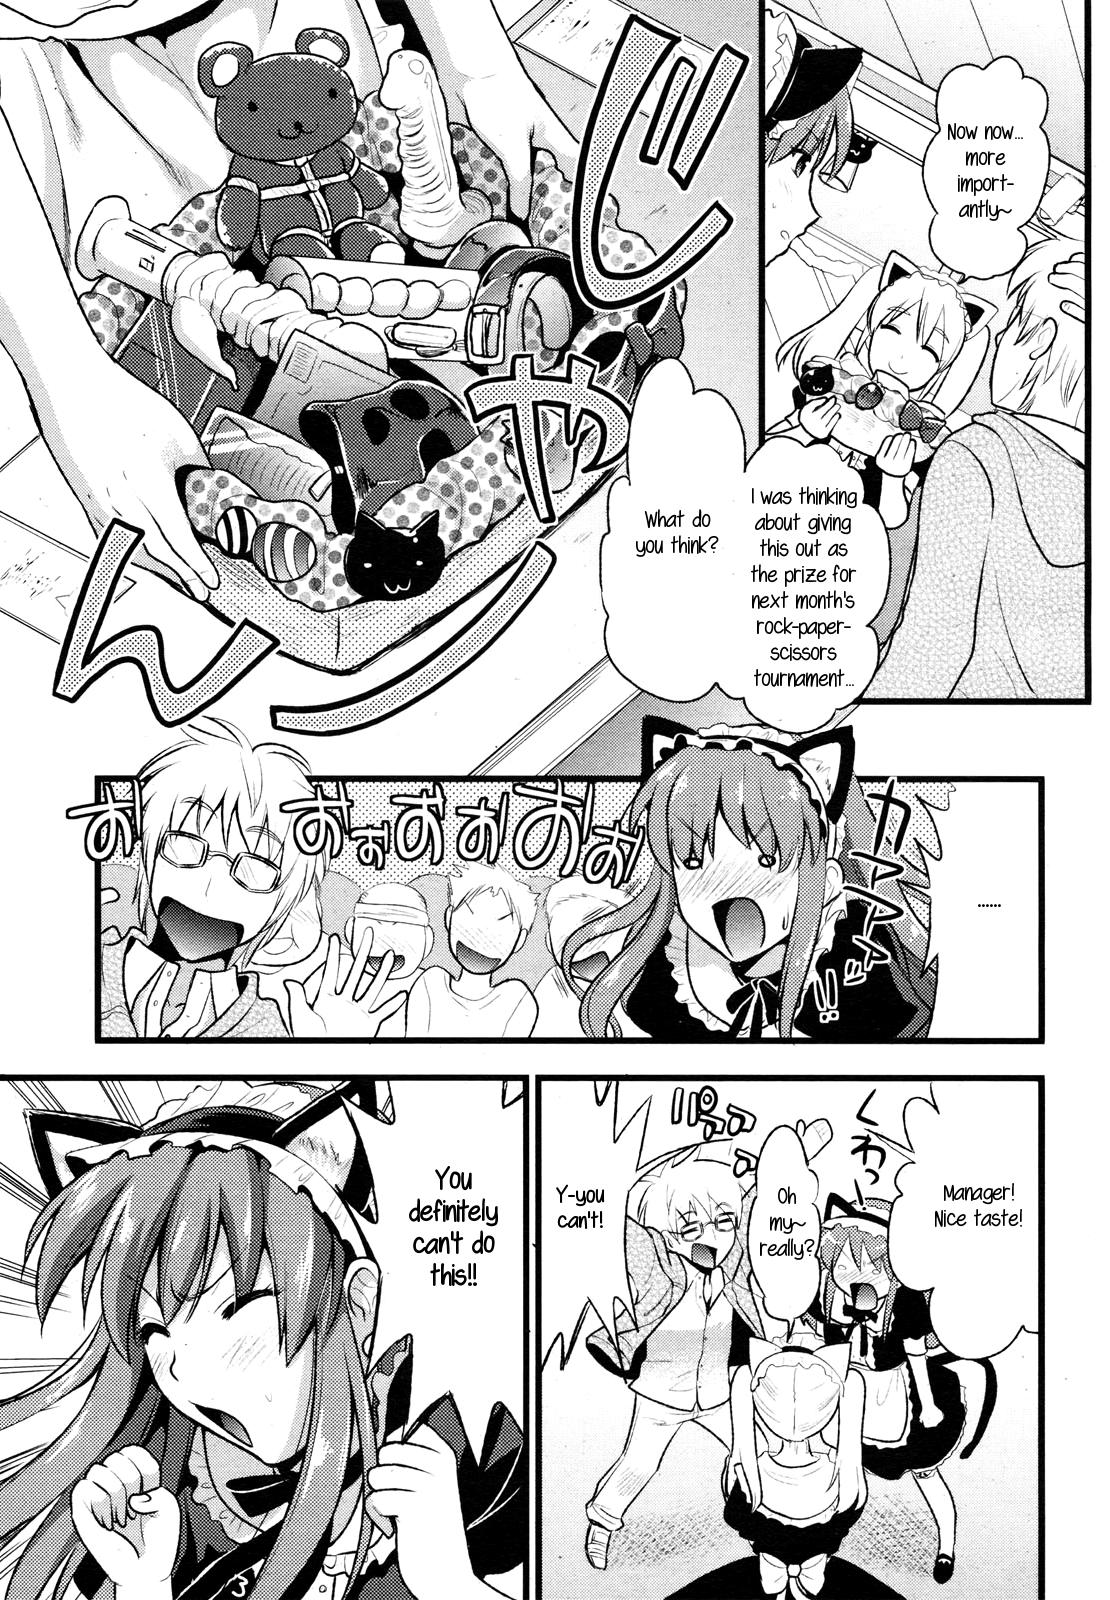 Stretching Tsundere Maid? Whores - Page 9